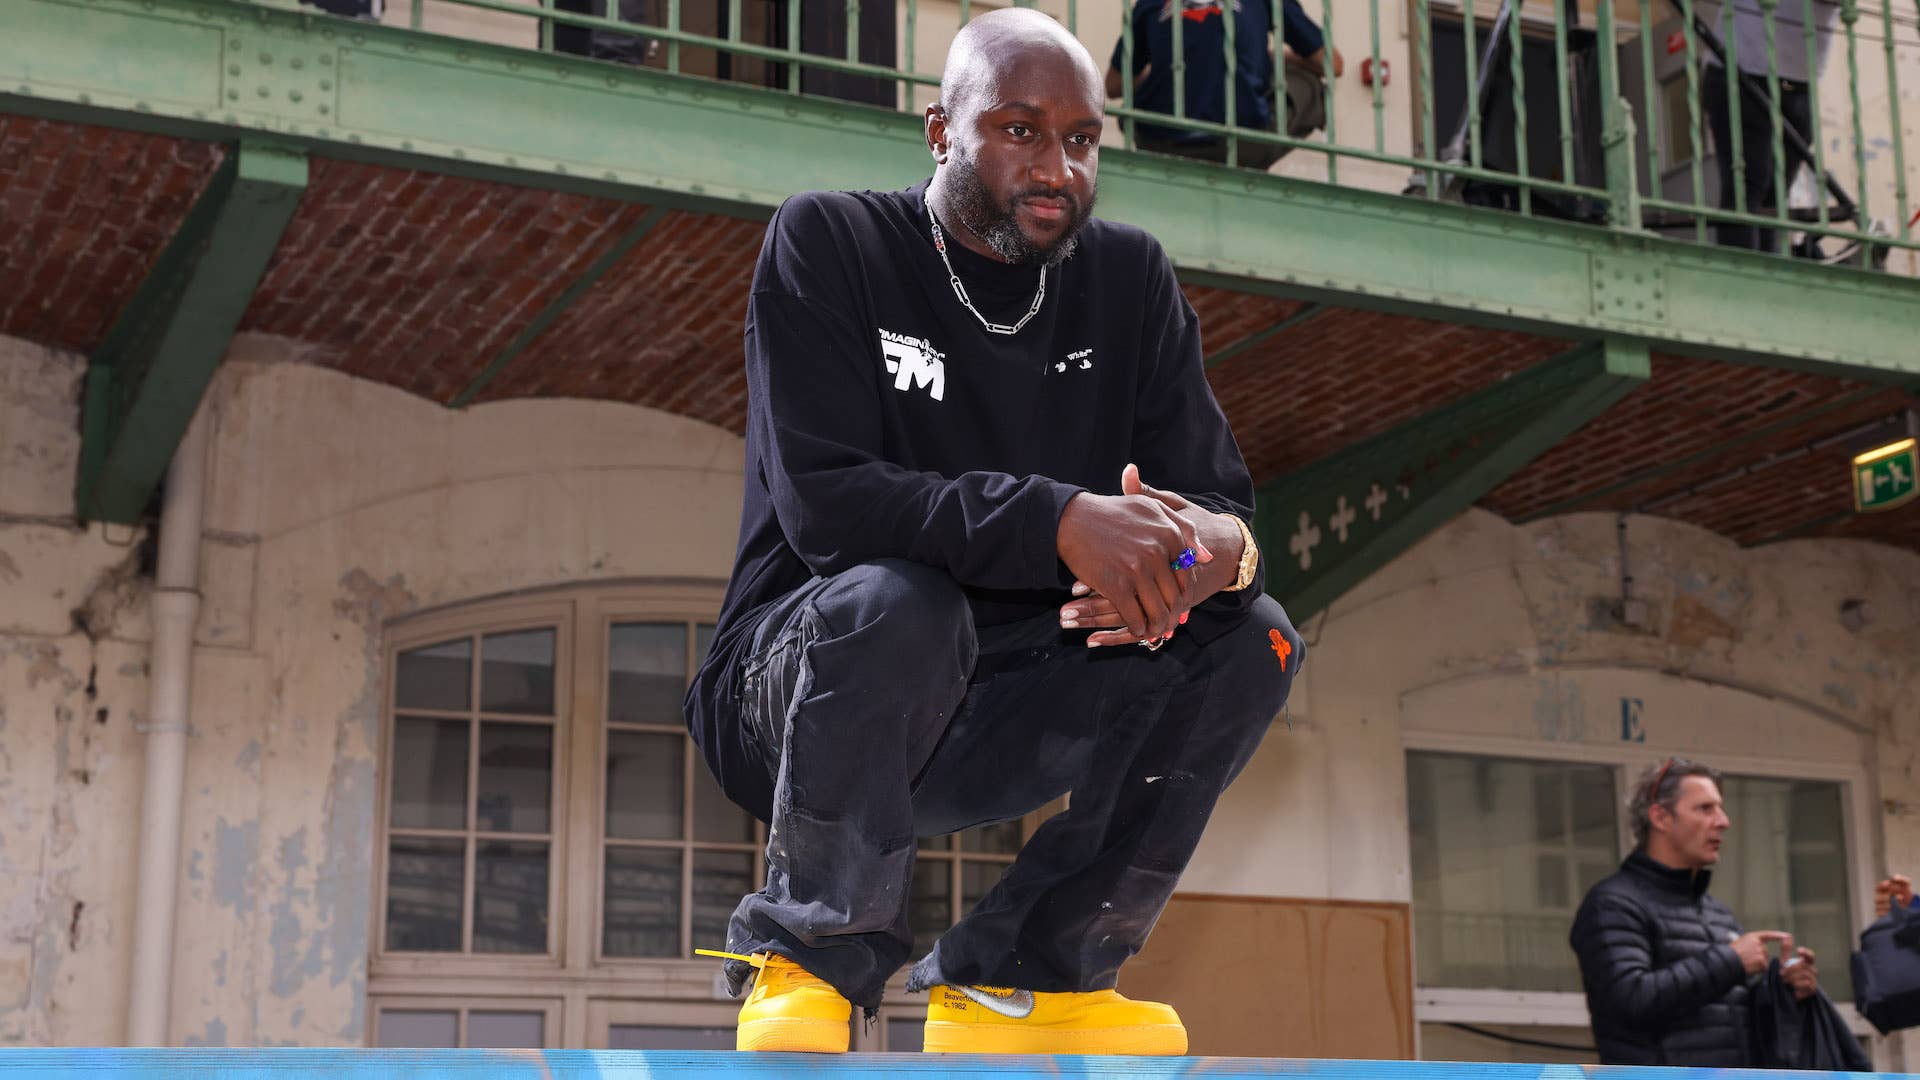 Virgil Abloh's Death and the Sudden Spike in Off-White Sneaker Prices